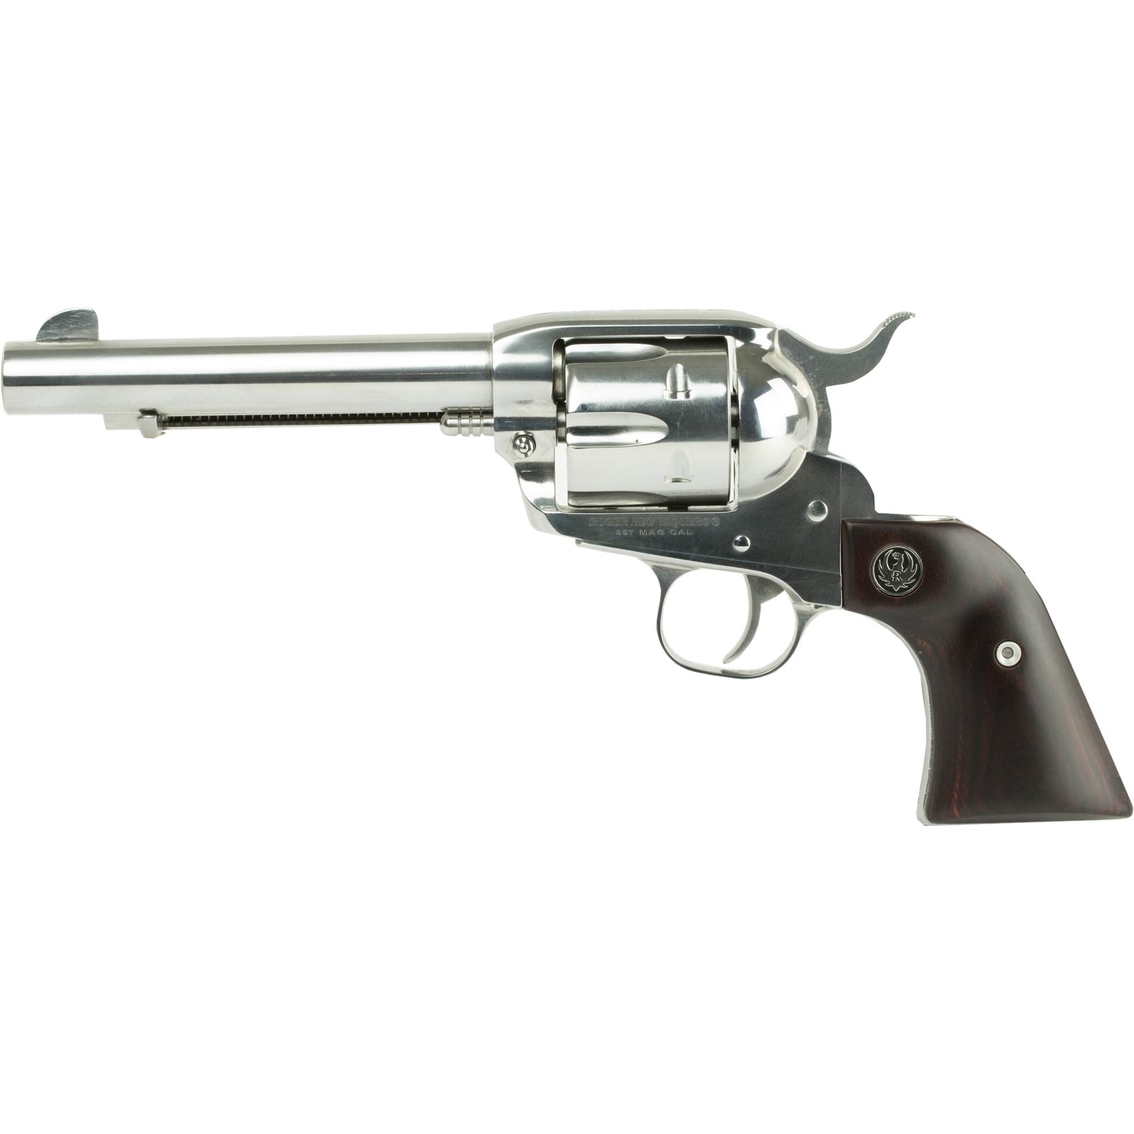 Ruger Vaquero 357 Mag 5.5 in. Barrel 6 Rnd Revolver Stainless Steel - Image 2 of 3